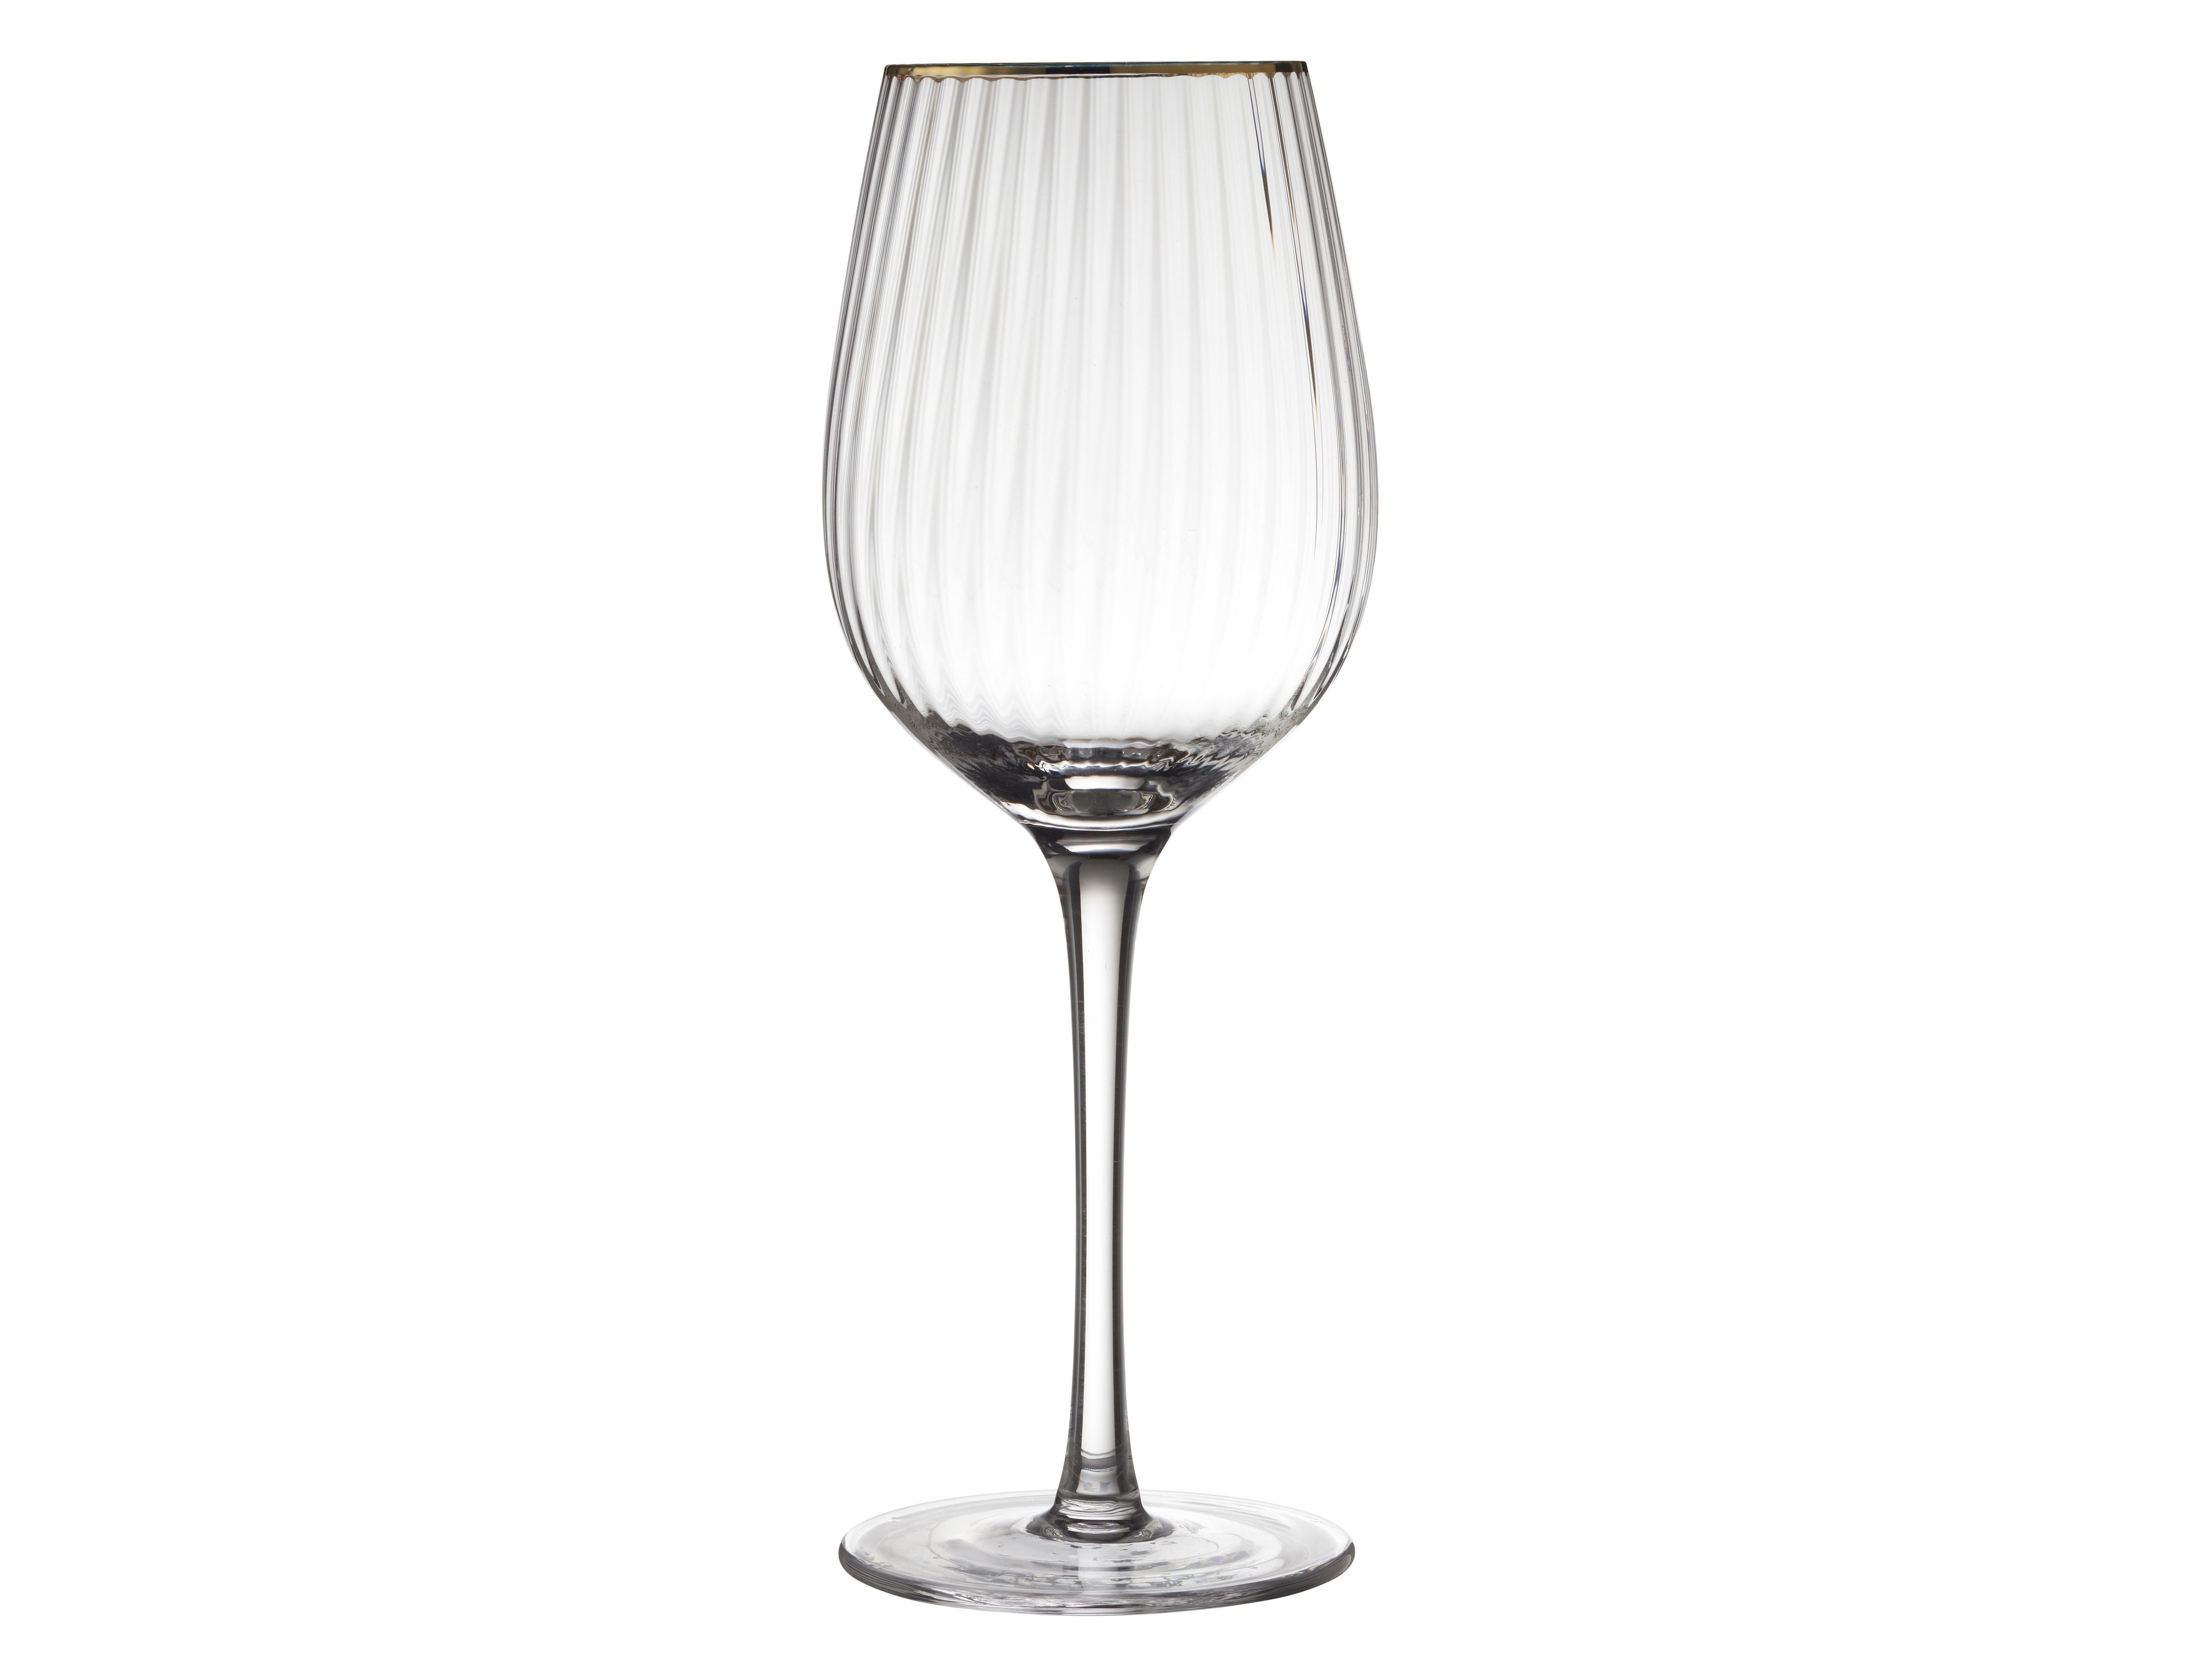 Lyngby Glas Palermo Gold Red Wine Verre 40 CL 4 PCS.